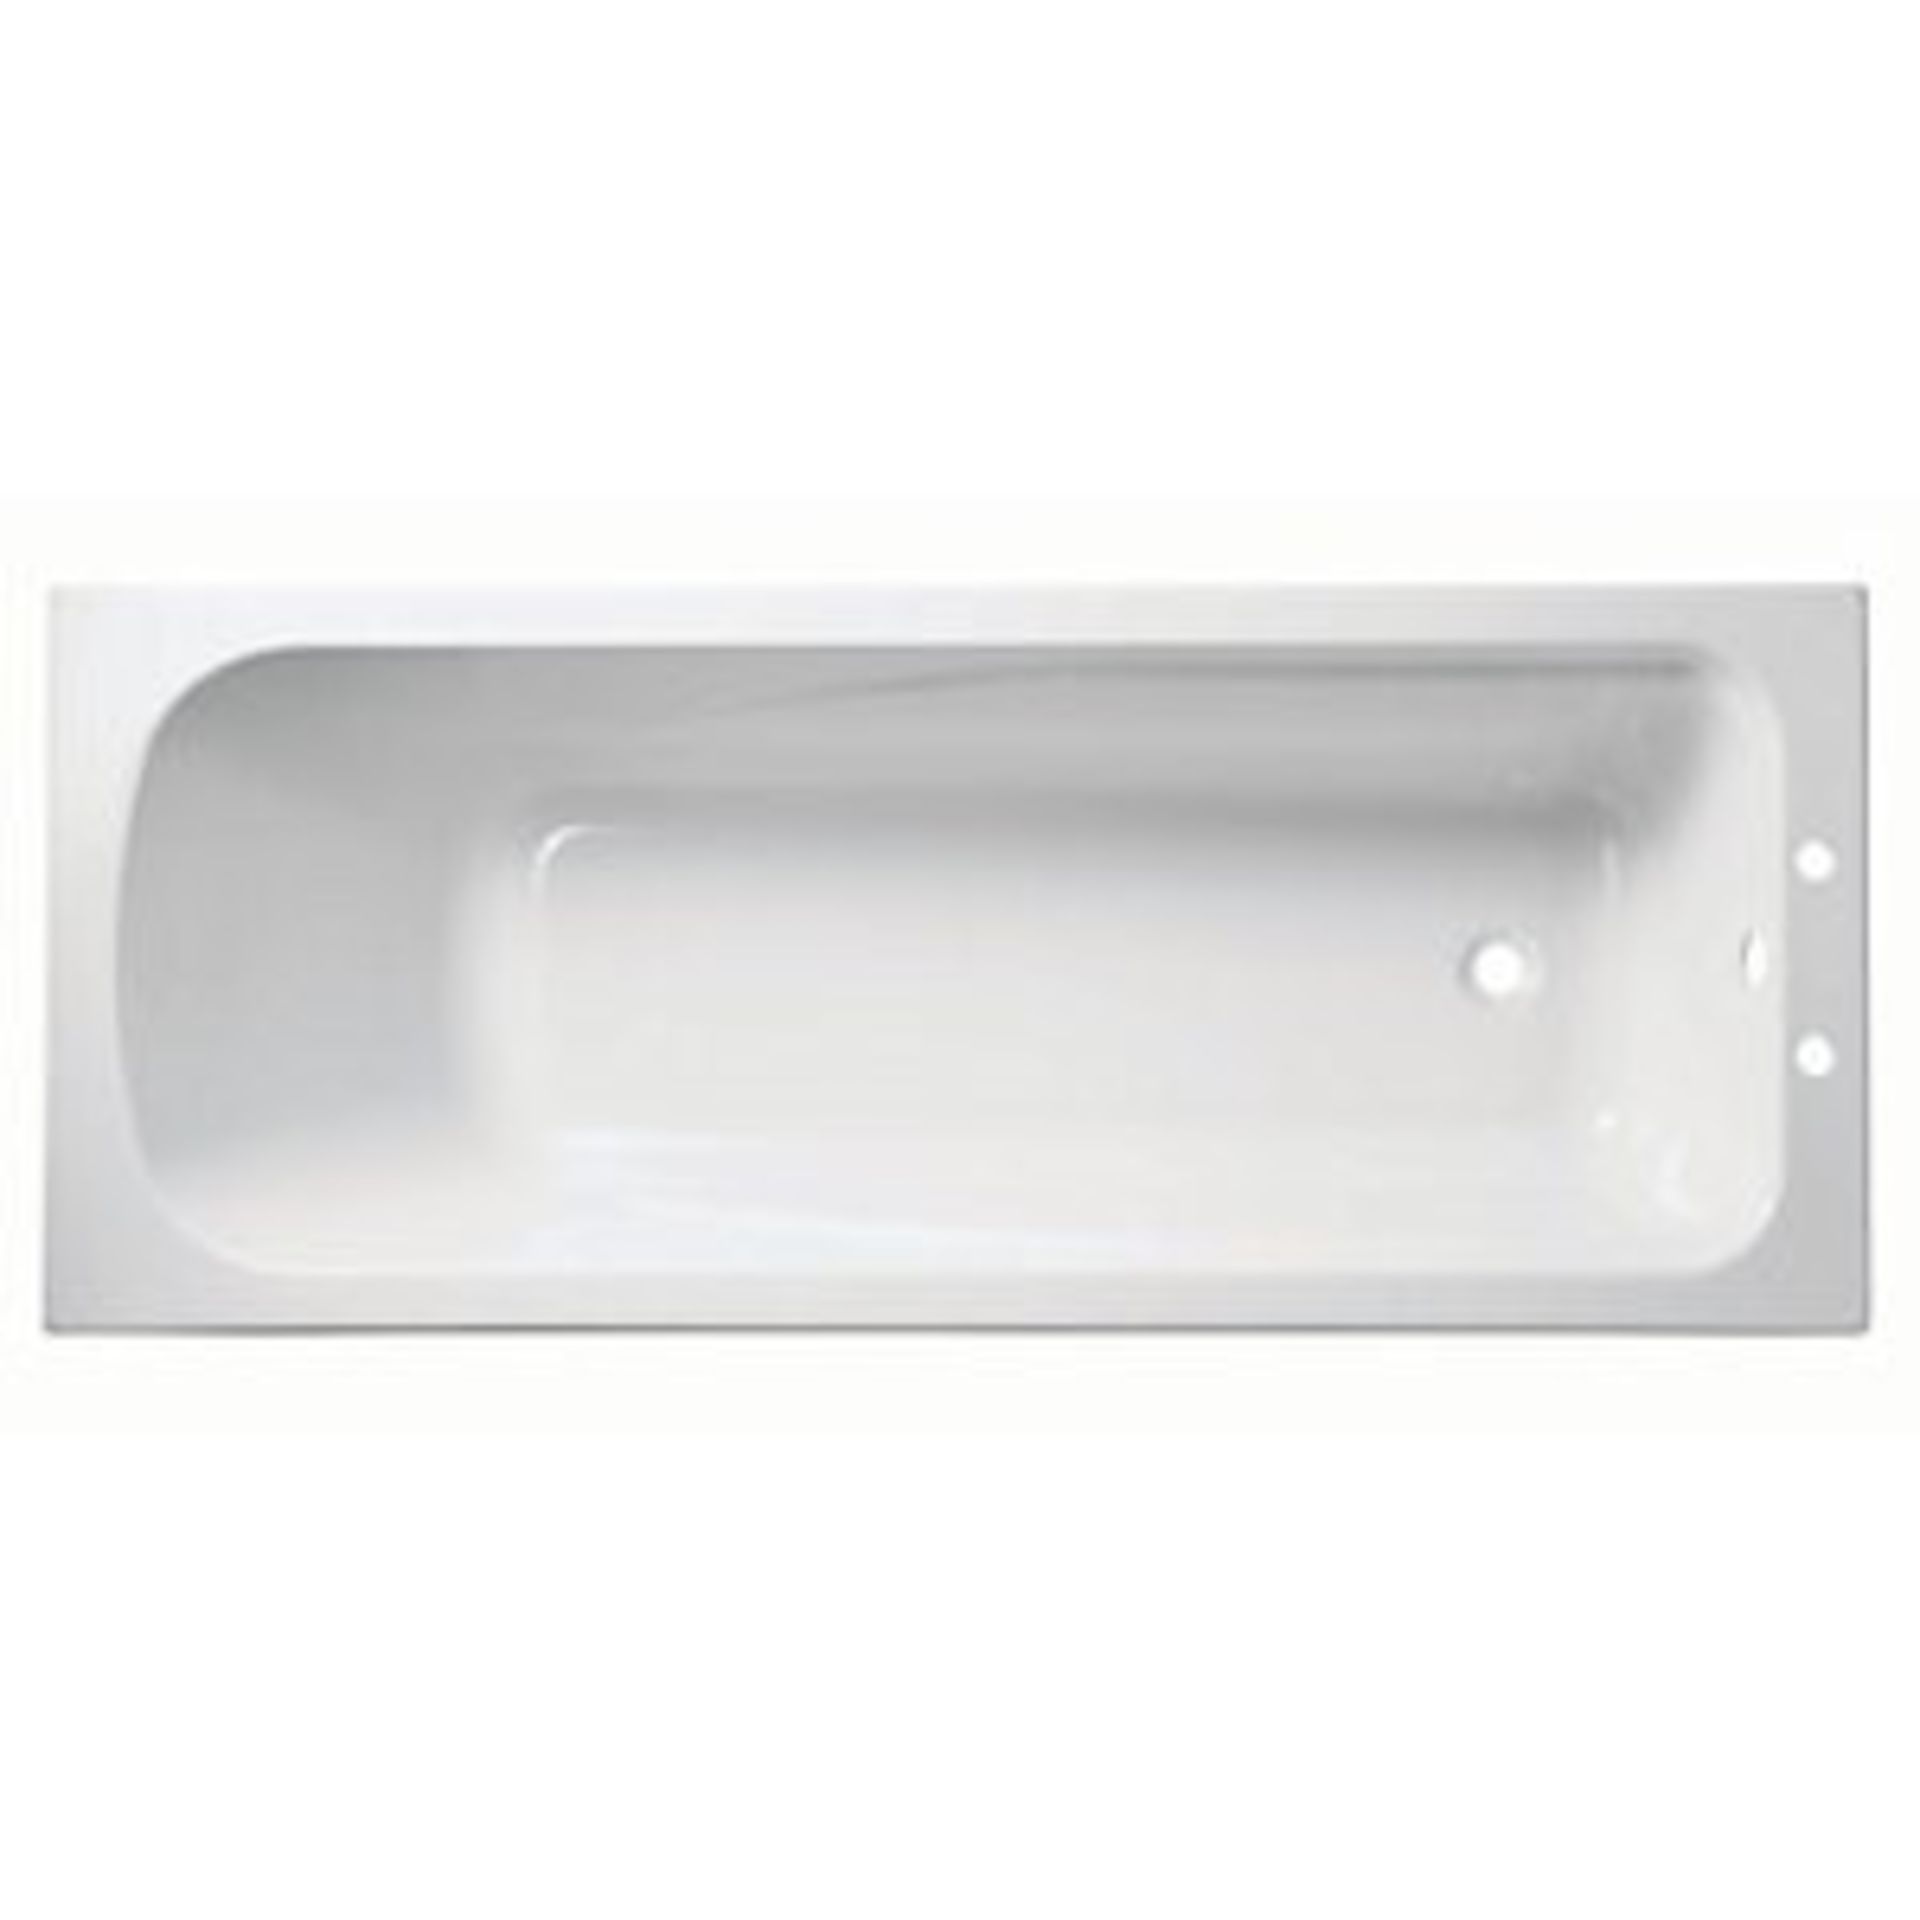 1 LOT TO CONTAIN AN ASSORTMENT OF 6 PLASTIC BATHS (PUBLIC VIEWING AVAILABLE AND HIGHLY RECOMMENDED -